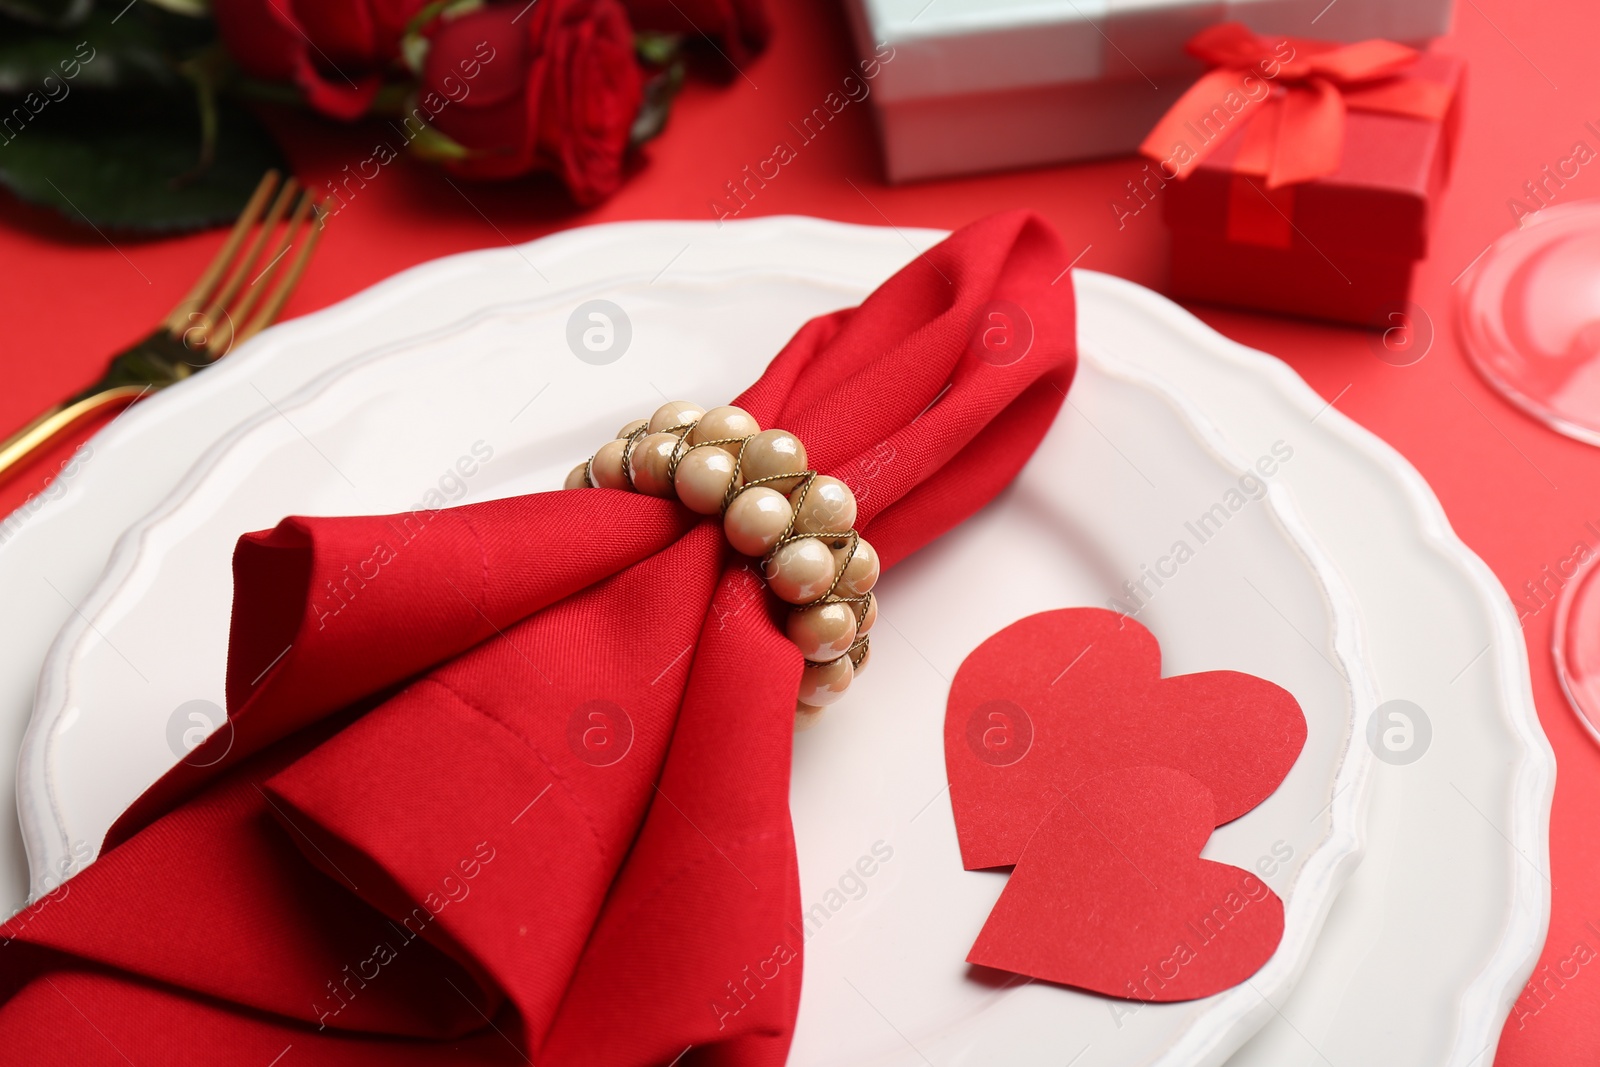 Photo of Plates with napkin, paper hearts, gift boxes and bouquet of roses on red table, closeup. Romantic dinner place setting